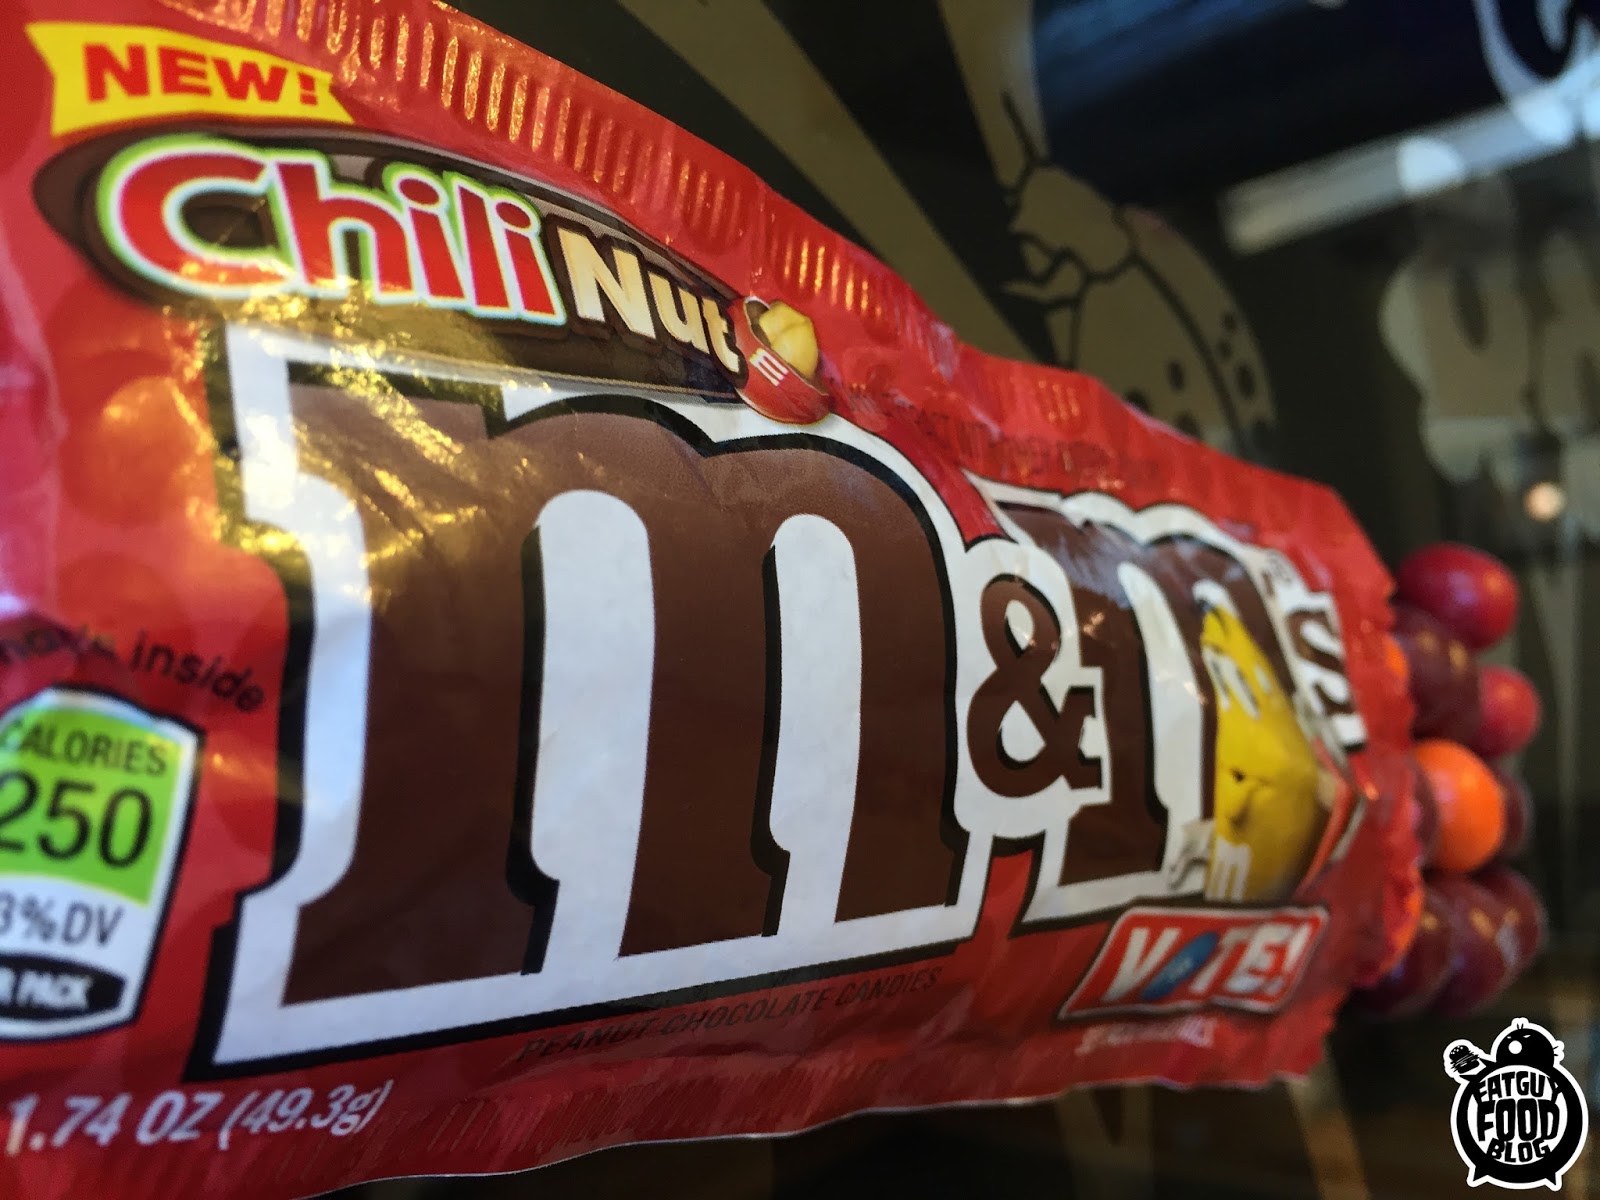 Discontinued Foods! on X: Chili Nut M&Ms (2016-2016): A trial